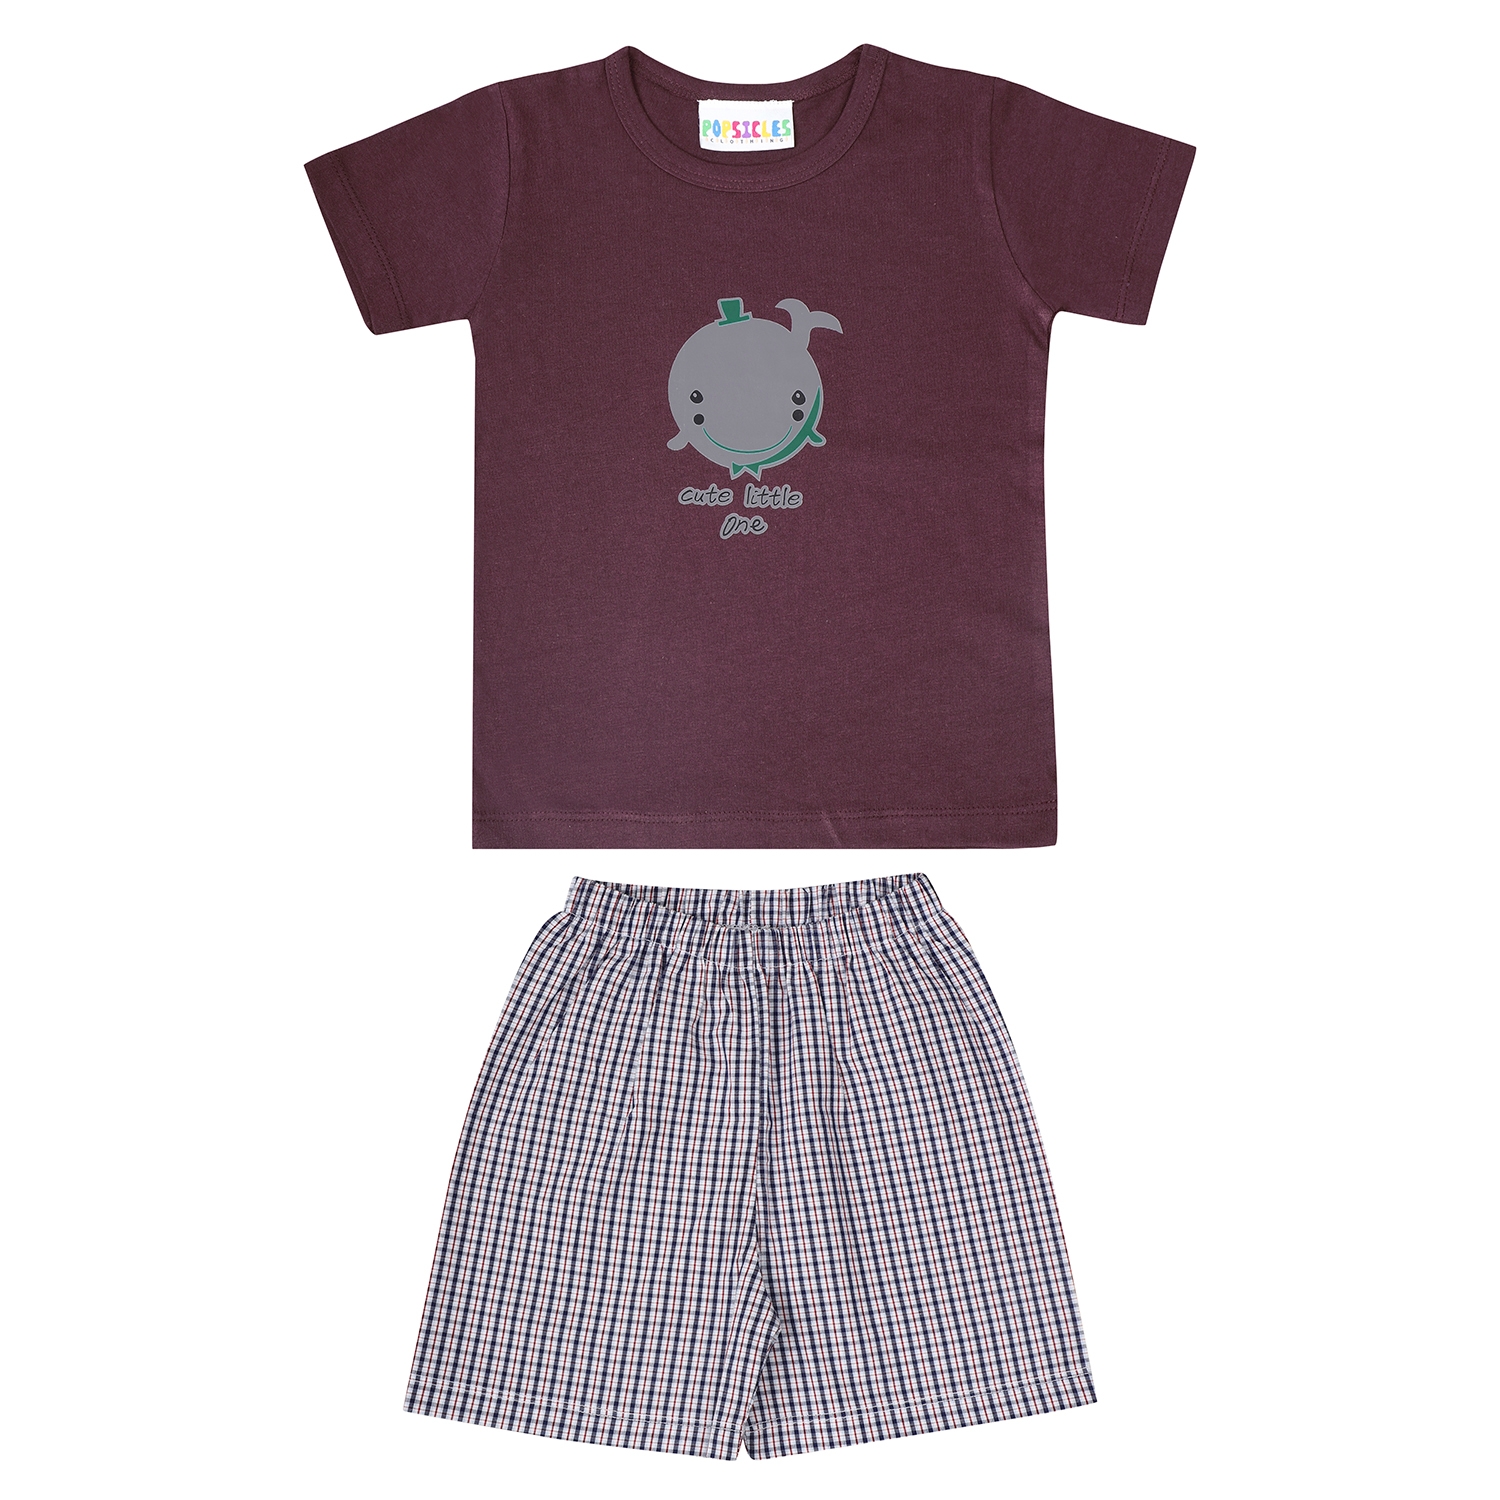 Popsicles Clothing | Popsicles Soft Cotton Comfort fit Round Neck Short Sleeves T-Shirt and Shorts Set for Boys - Burgundy (0-6M)